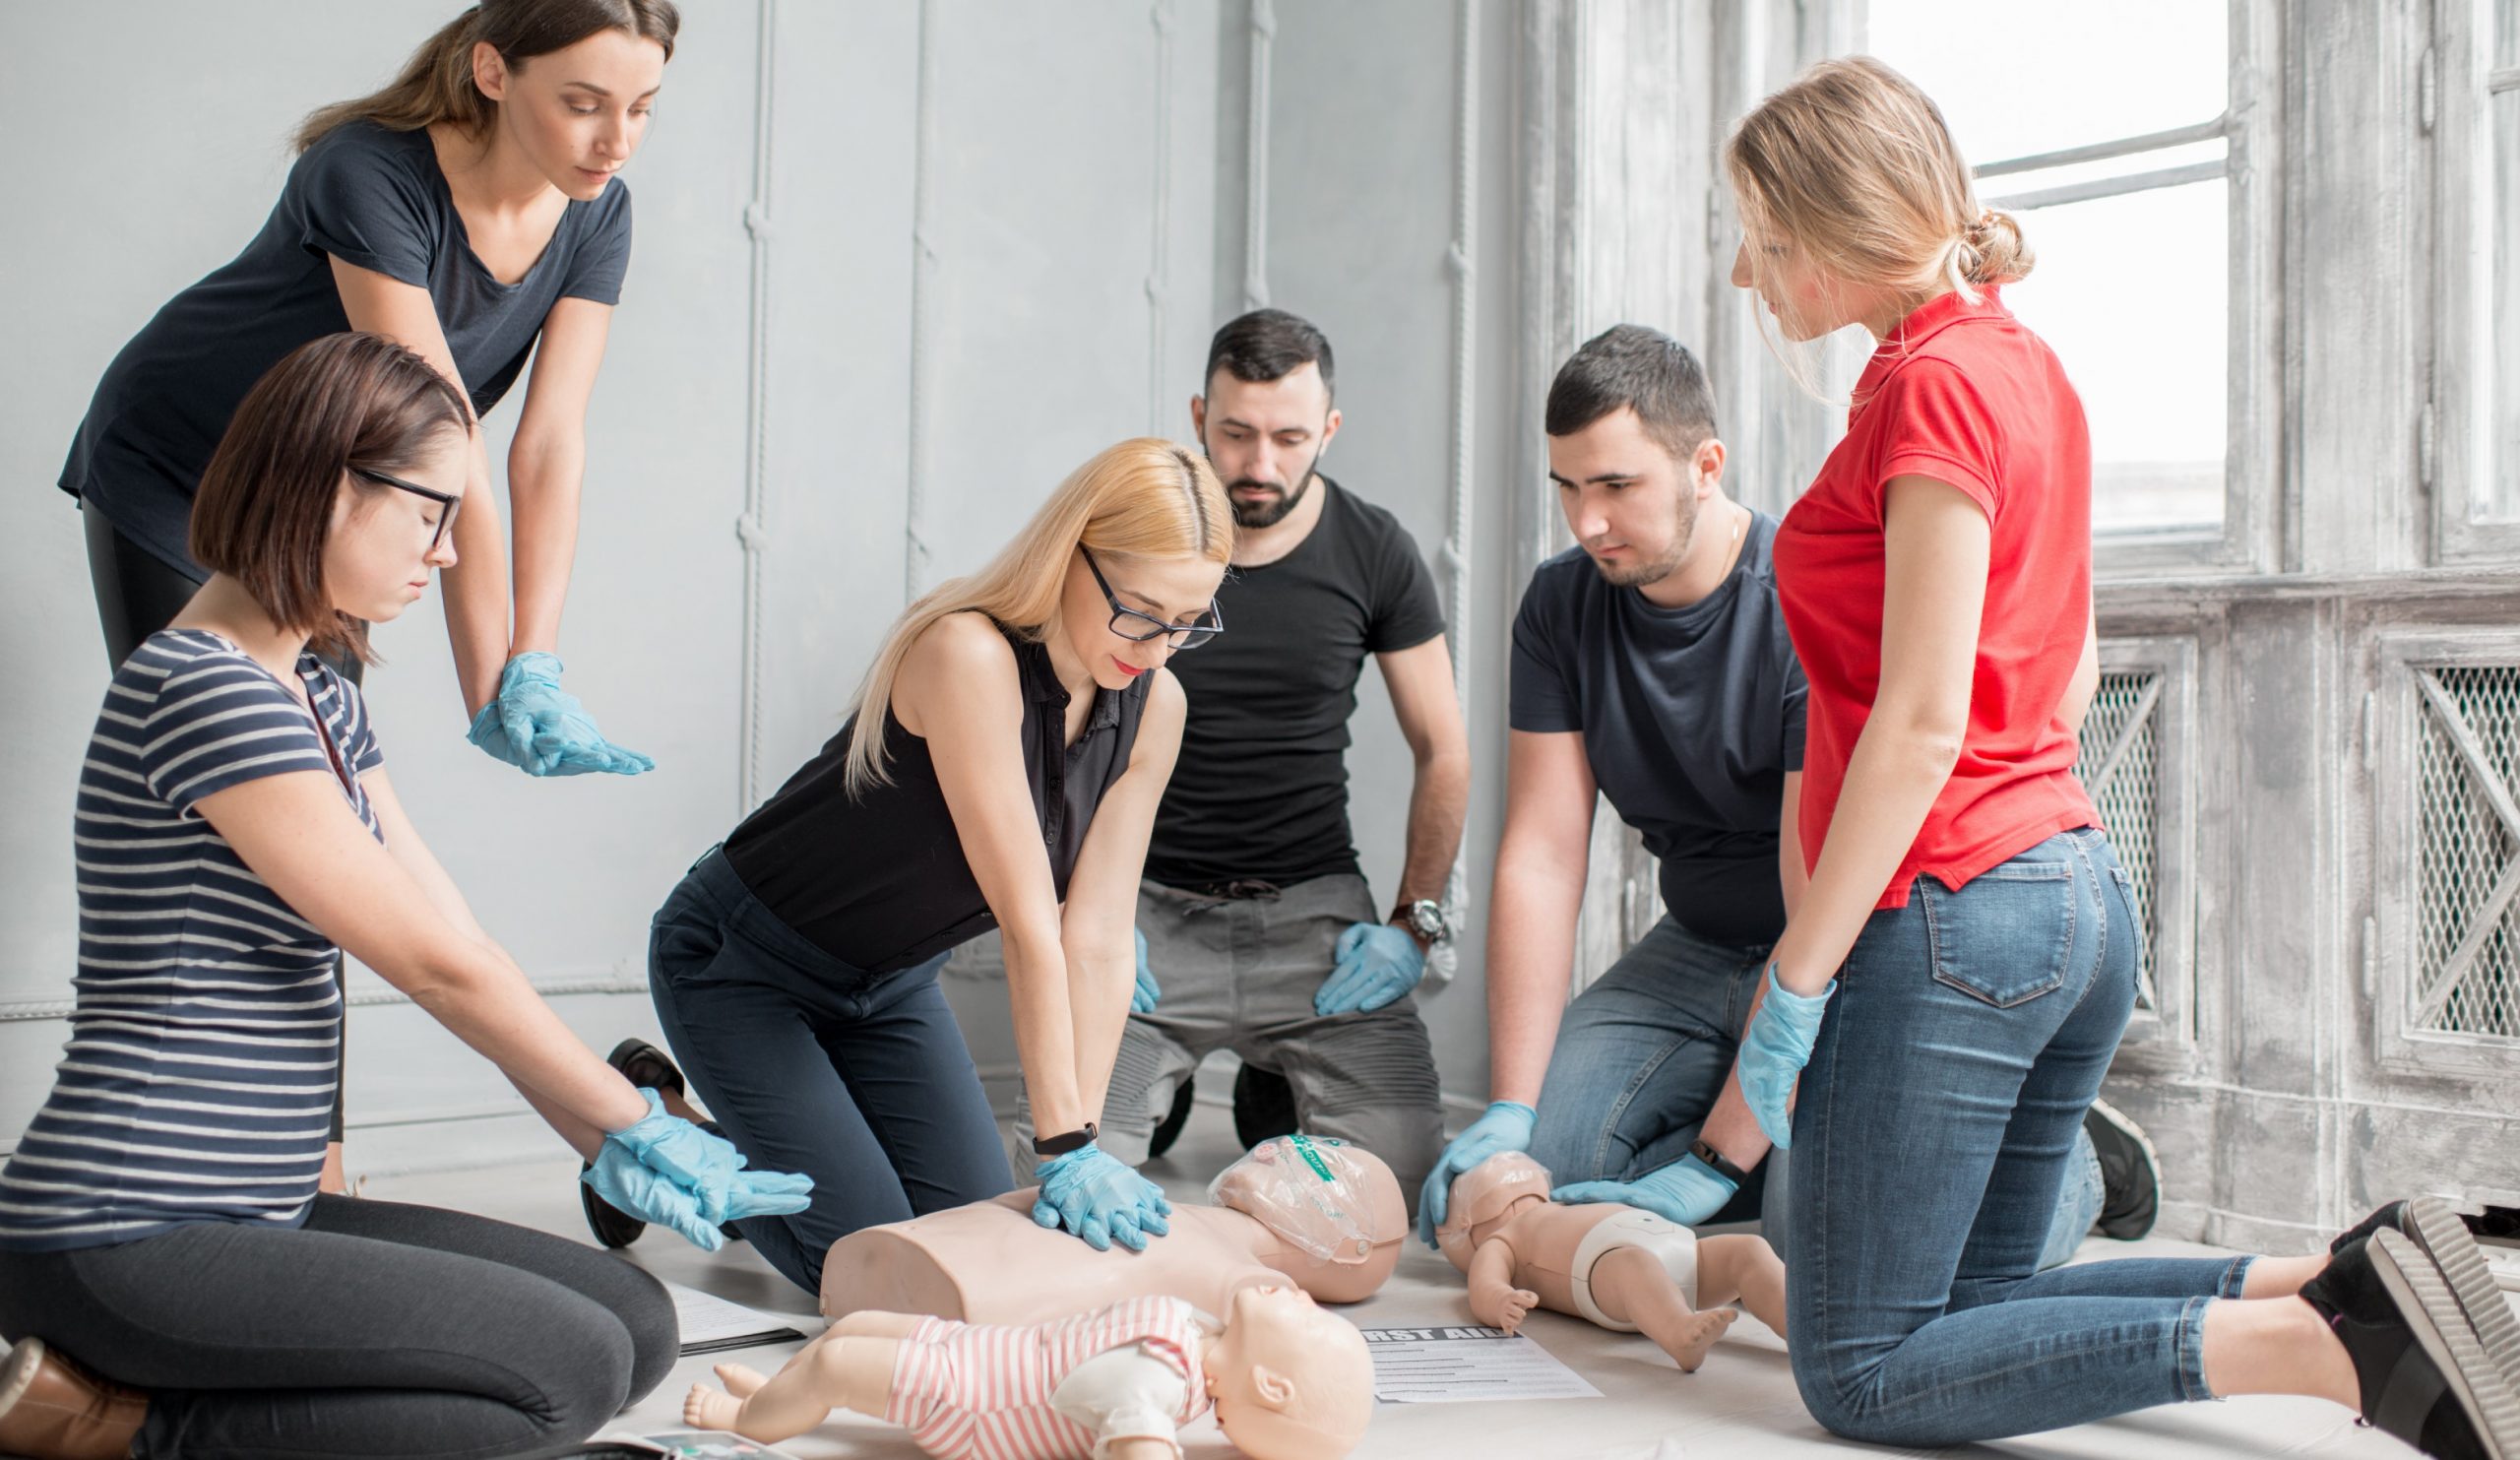 Most people who learn first aid, do so at work. The most effective first aid training however, involves people who have chosen to participate.